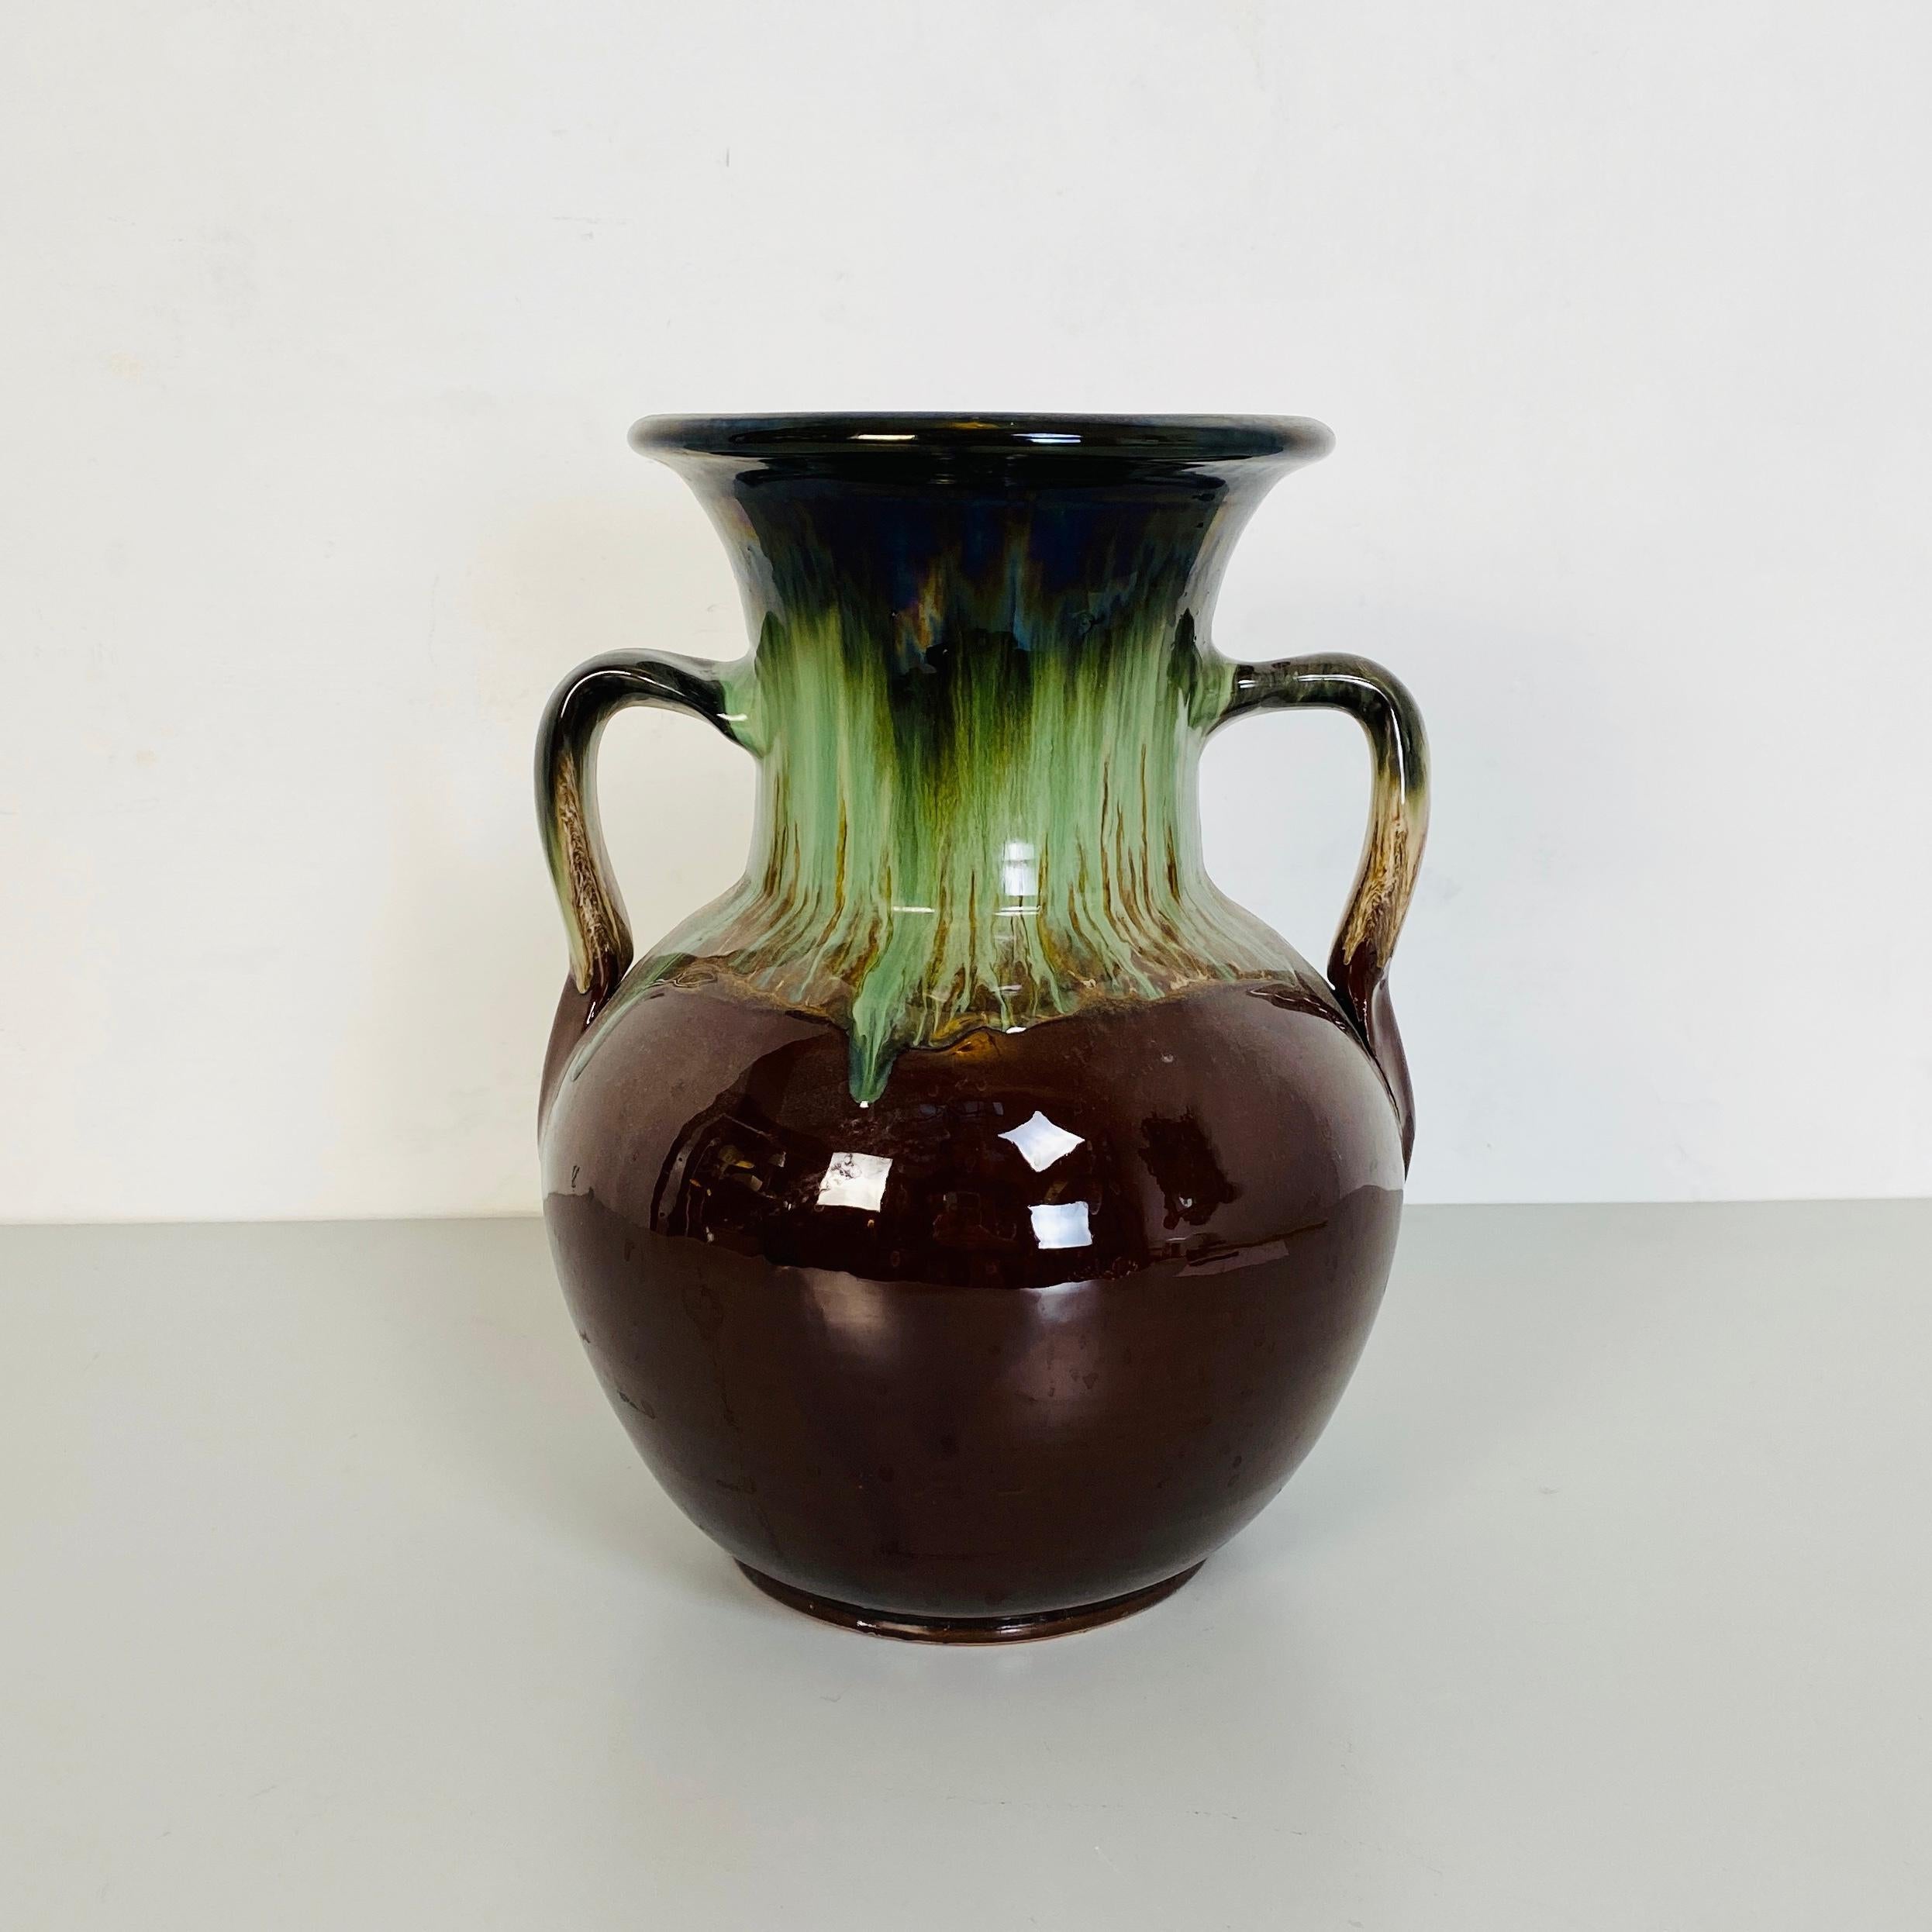 Beautiful Italian vase mid-century, modern green and brown Glazed ceramic amphora, 1960s.
Brown and green glazed ceramic amphora.
This vase is from 1960 period and is conserved very well. 
This vase have Any cip s present and any restore was done
In